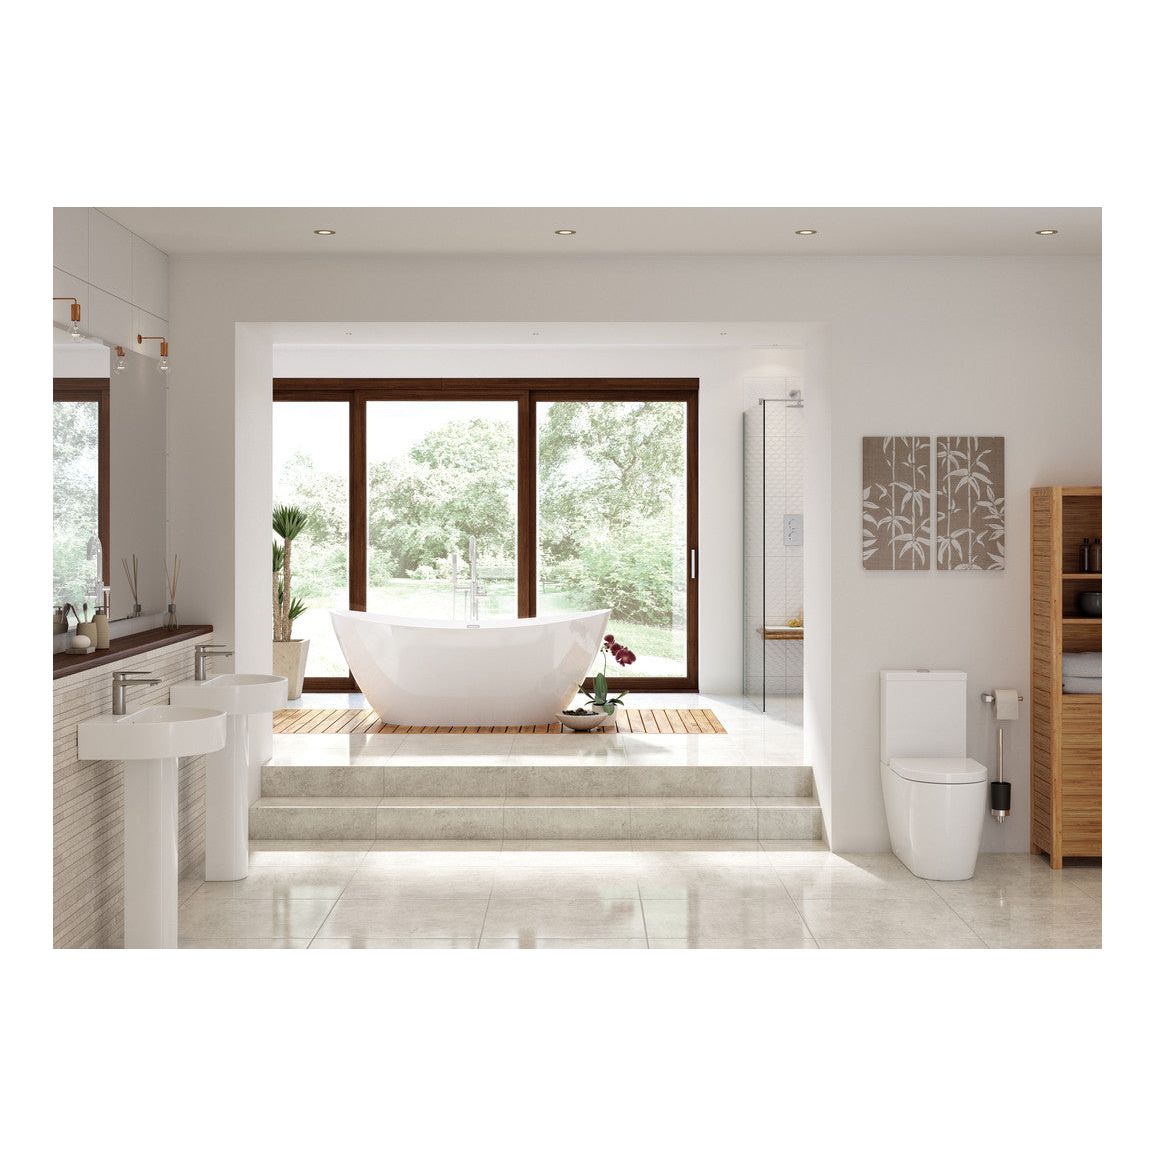 Alor Rimless Close Coupled Fully Shrouded Comfort Height WC & Soft Close Seat